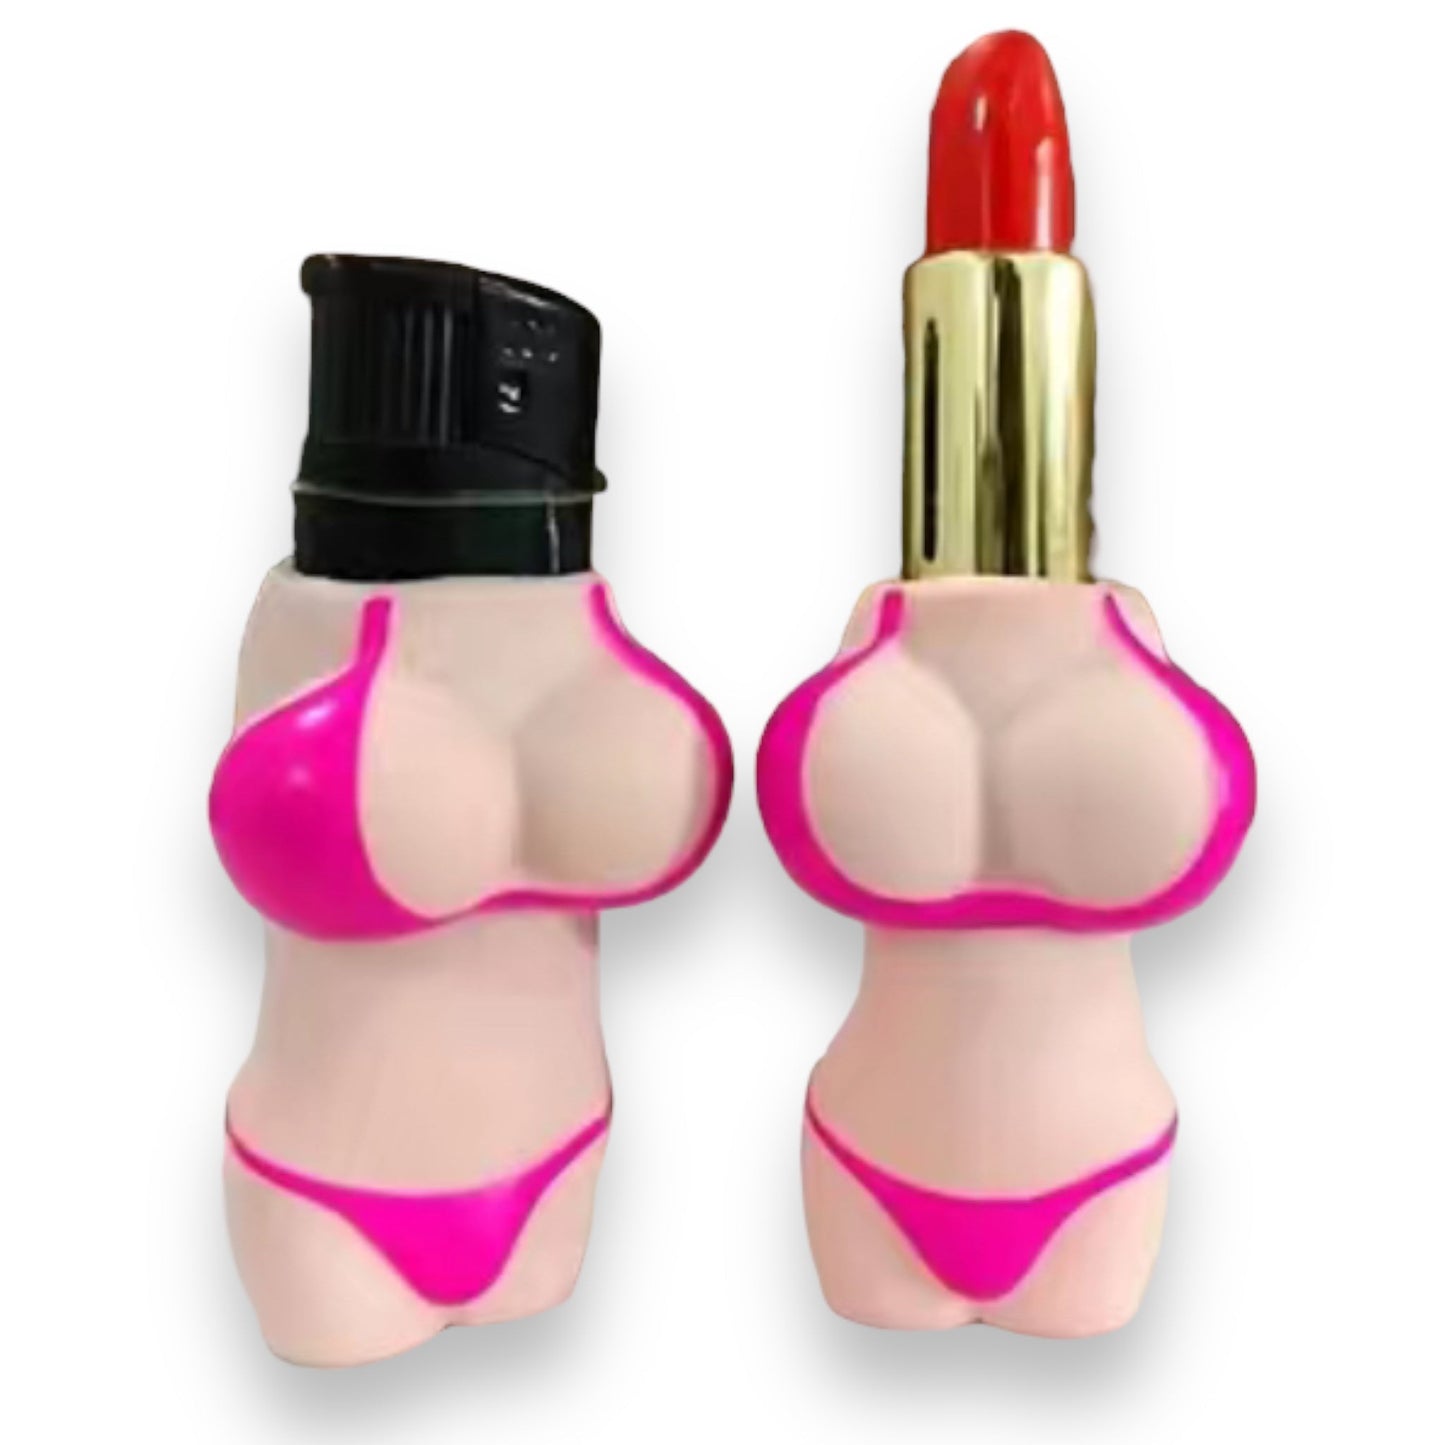 Lighter Cover Sexy Body for Man or Woman in 3 Colors